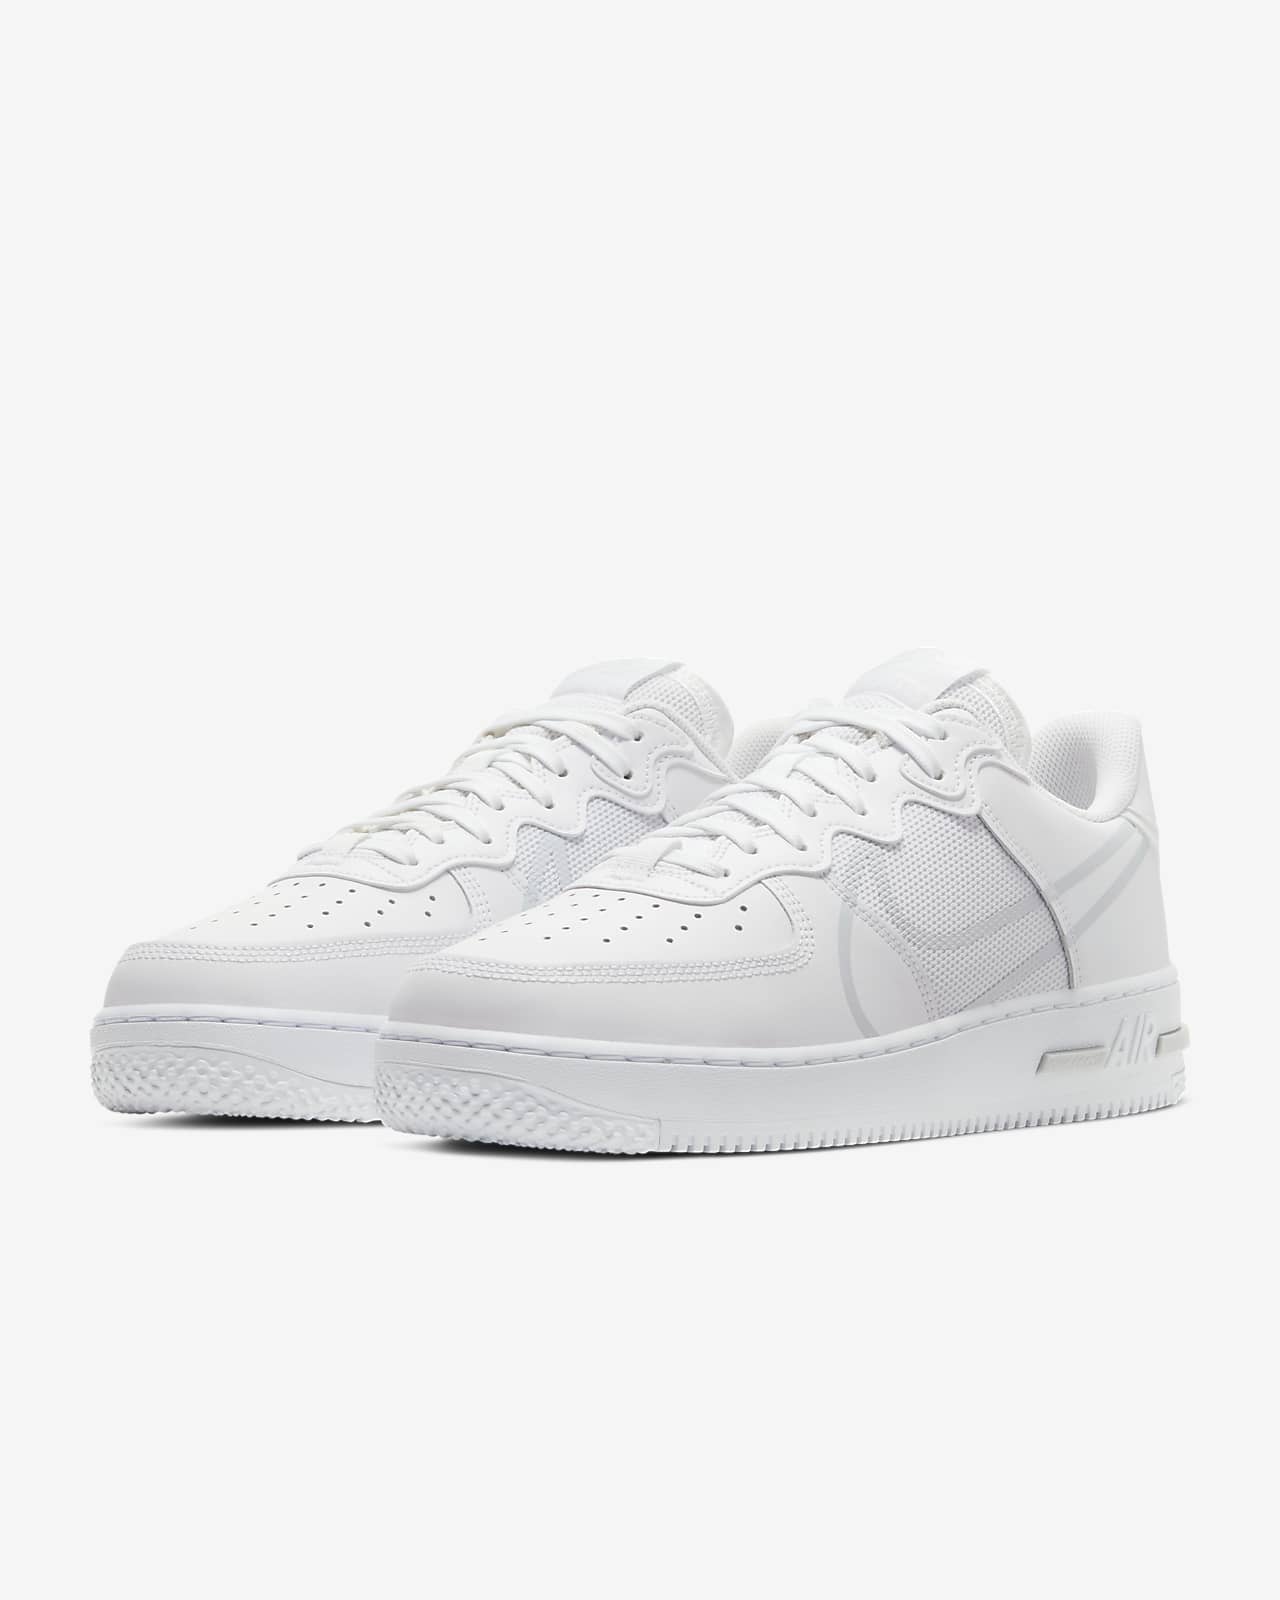 nike air force 1 white on sale